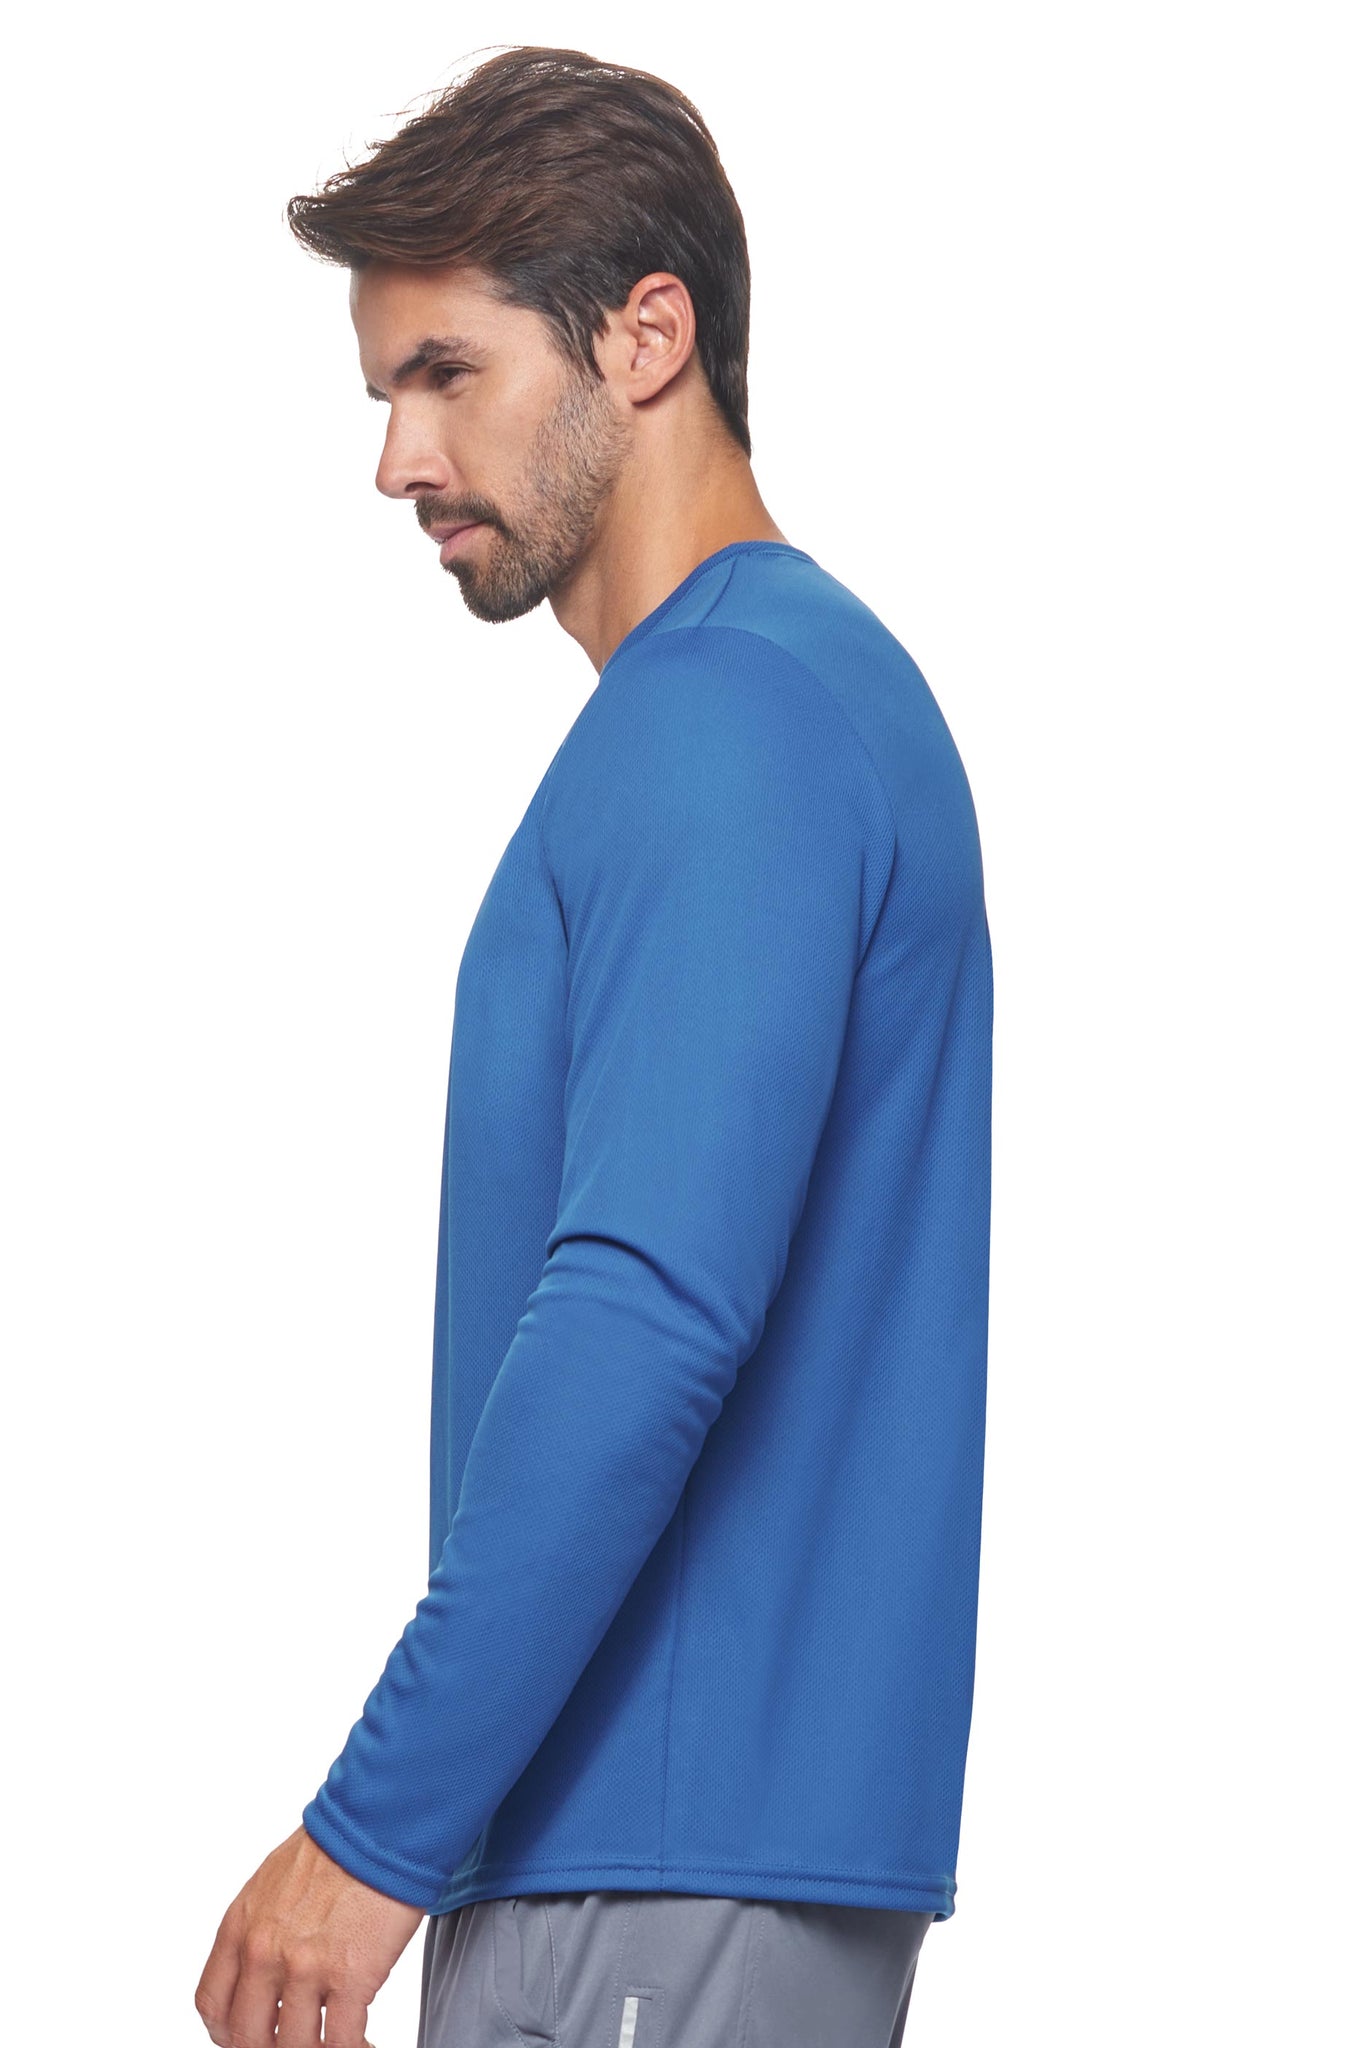 Expert Brand Wholesale Blank Made in USA Men's Long Sleeve Performance Fitness Running Tee Oxymesh™ Tec  in royal blue image 2#royal-blue